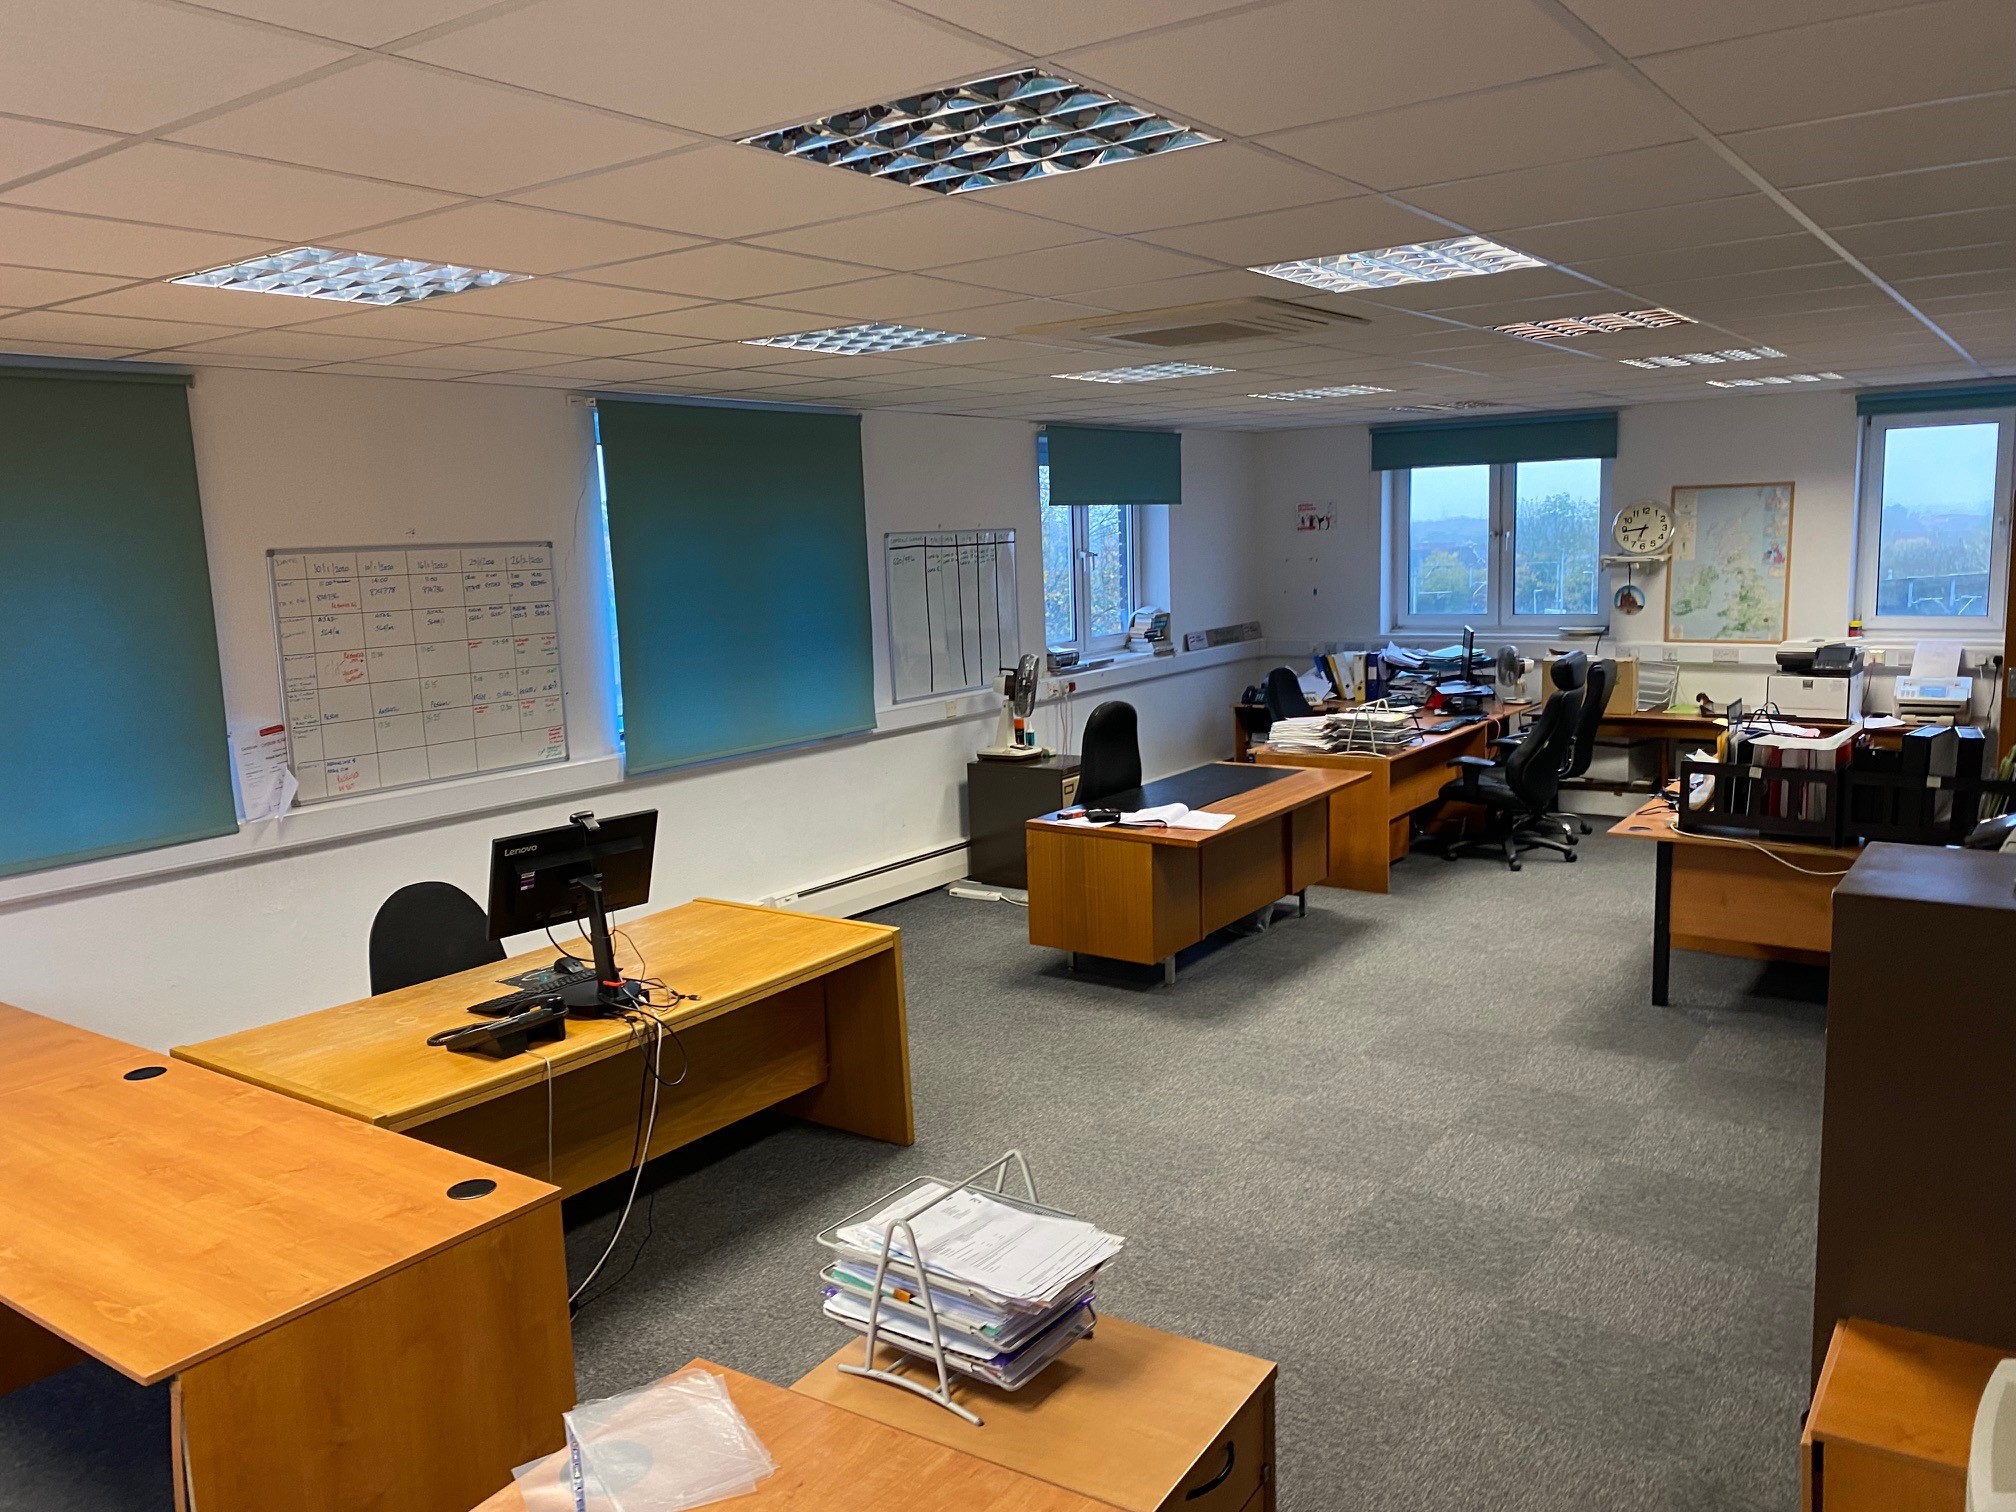 934 sq ft Office to Let at Philpot House, Rayleigh, Essex